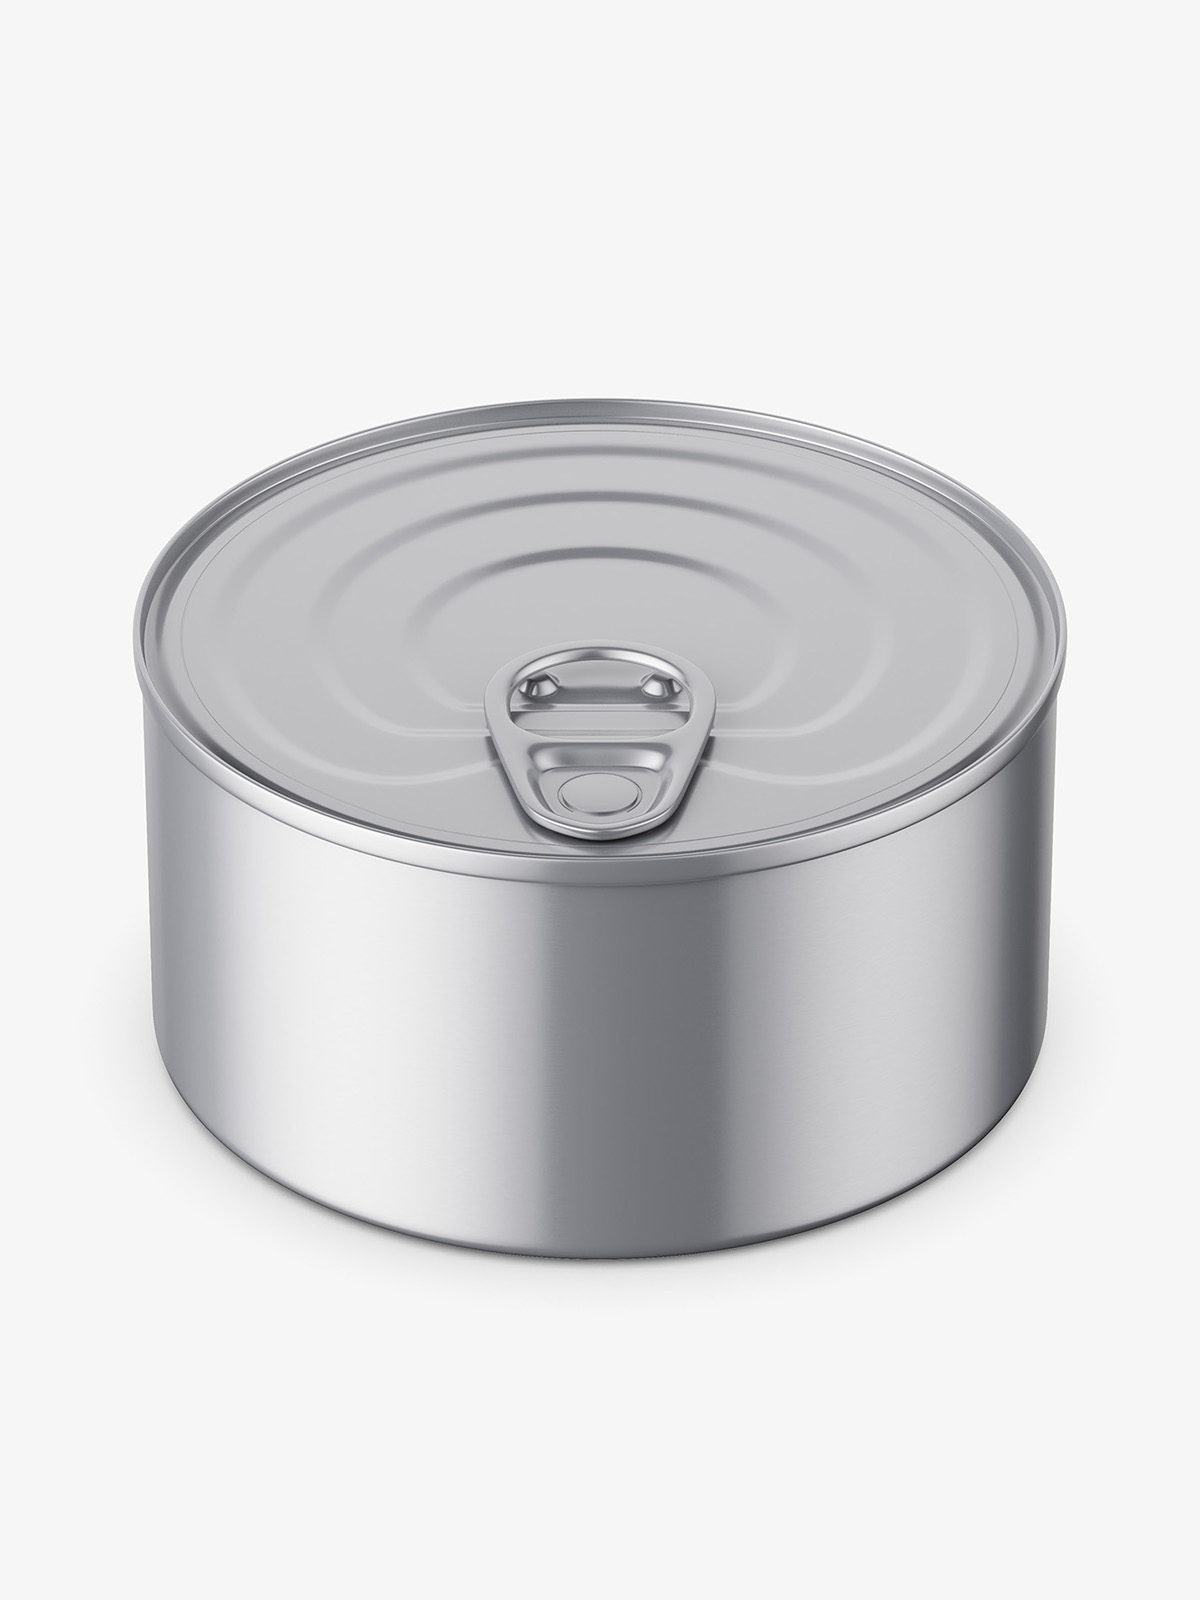 Download Tin can mockup / top view - Smarty Mockups